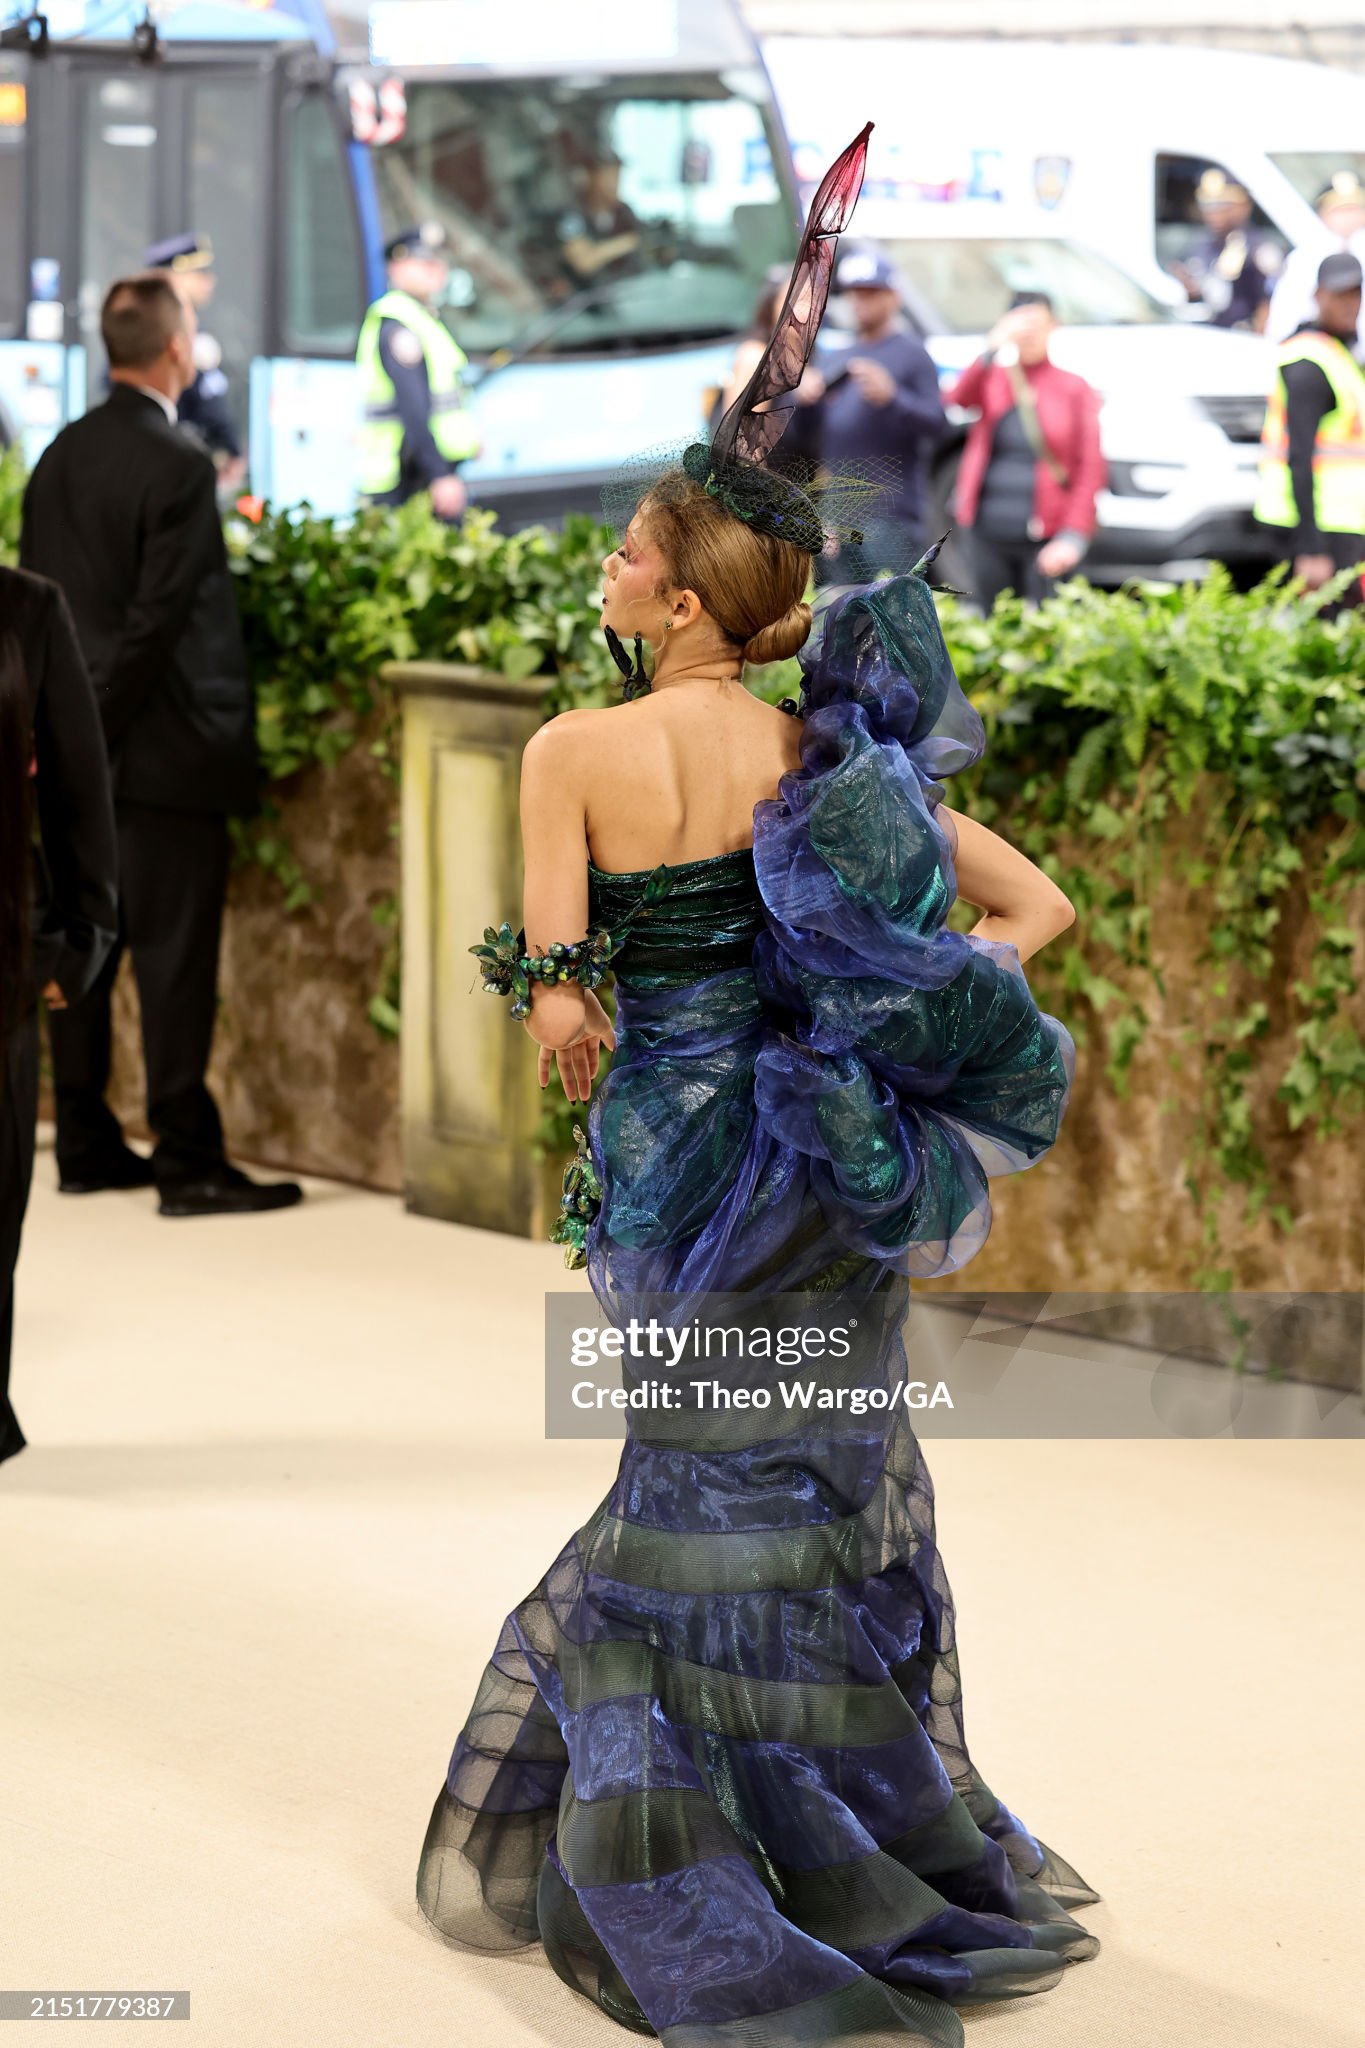 gettyimages-2151779387-2048x2048.jpg